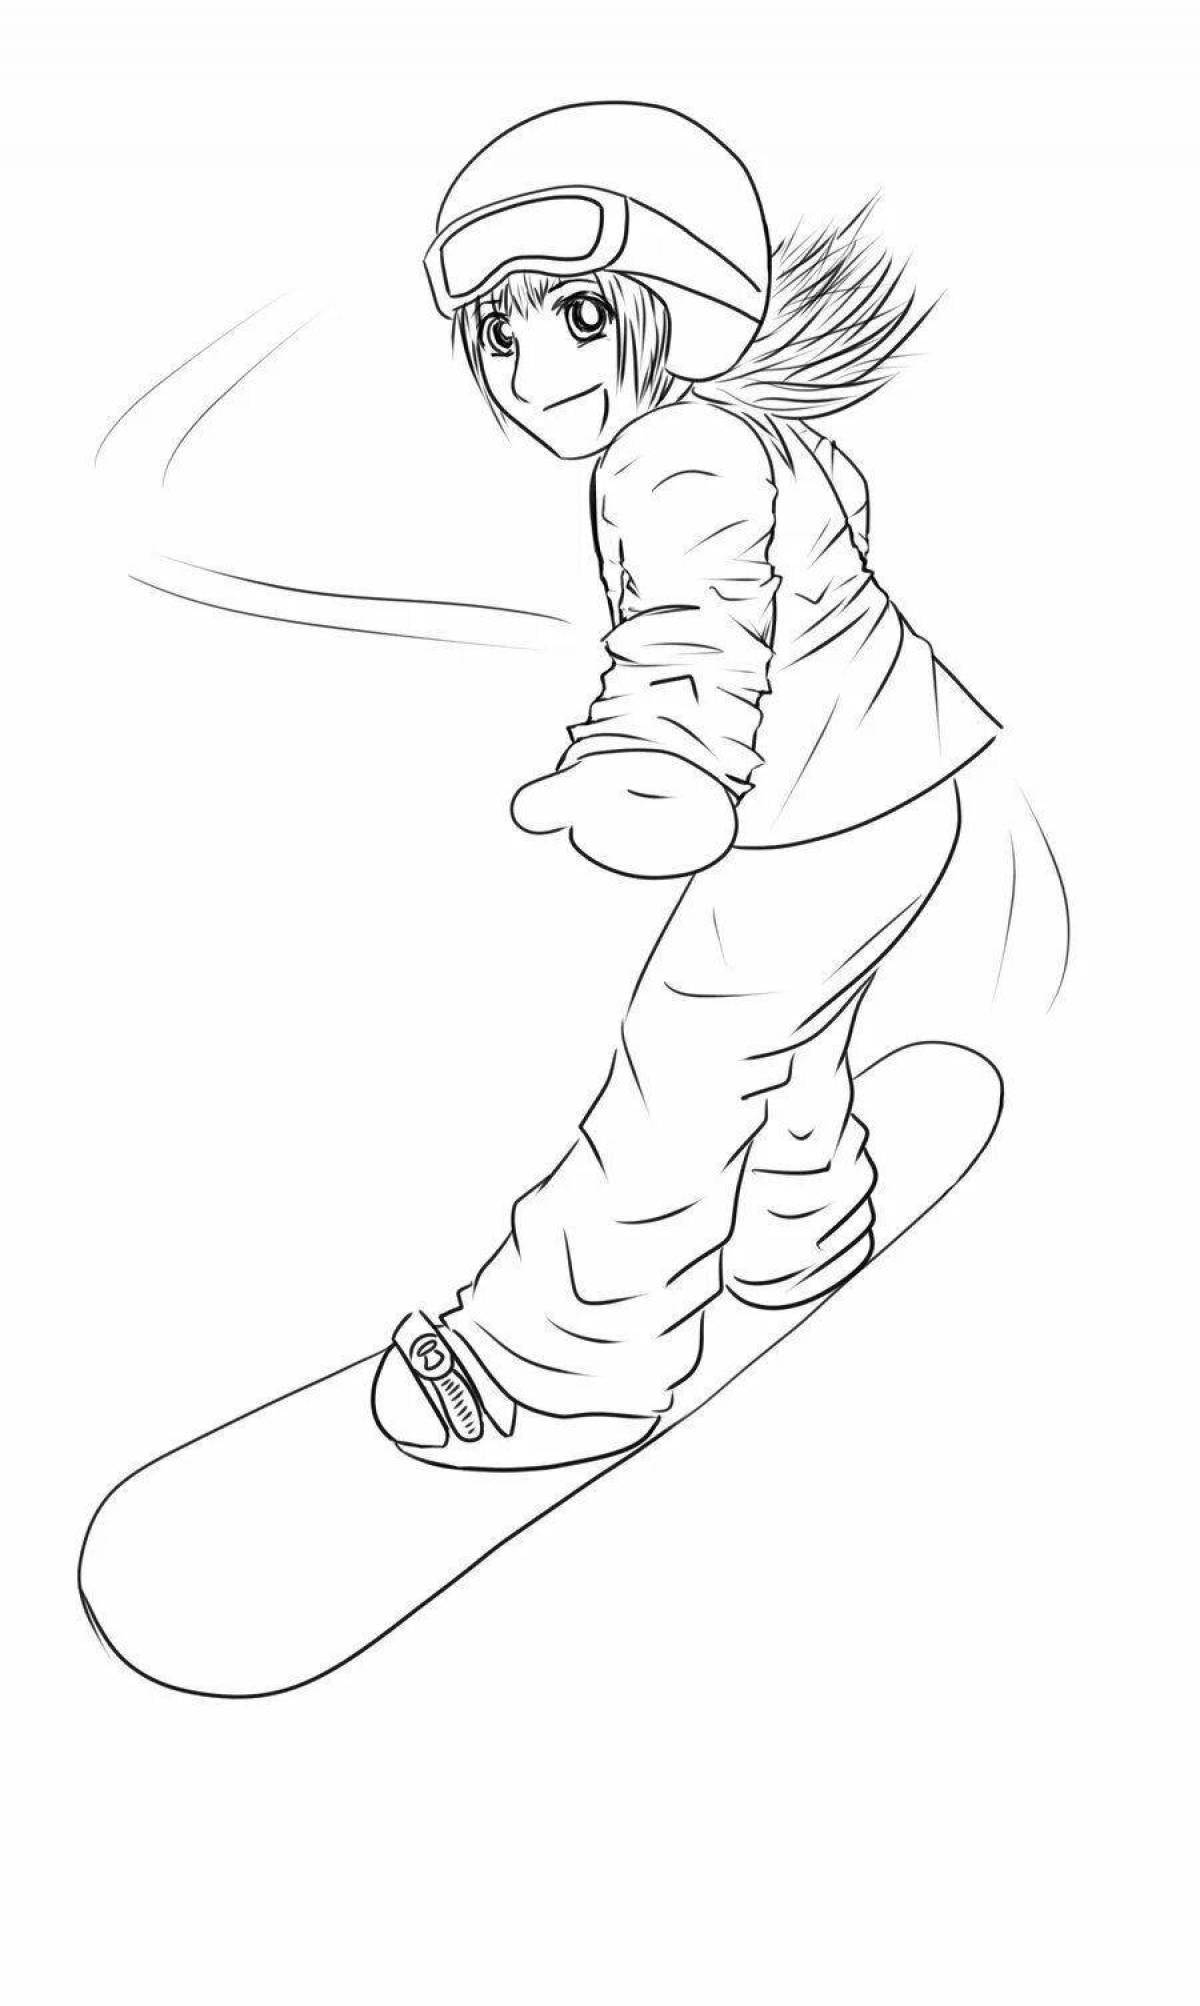 Outstanding snowboard coloring page for kids